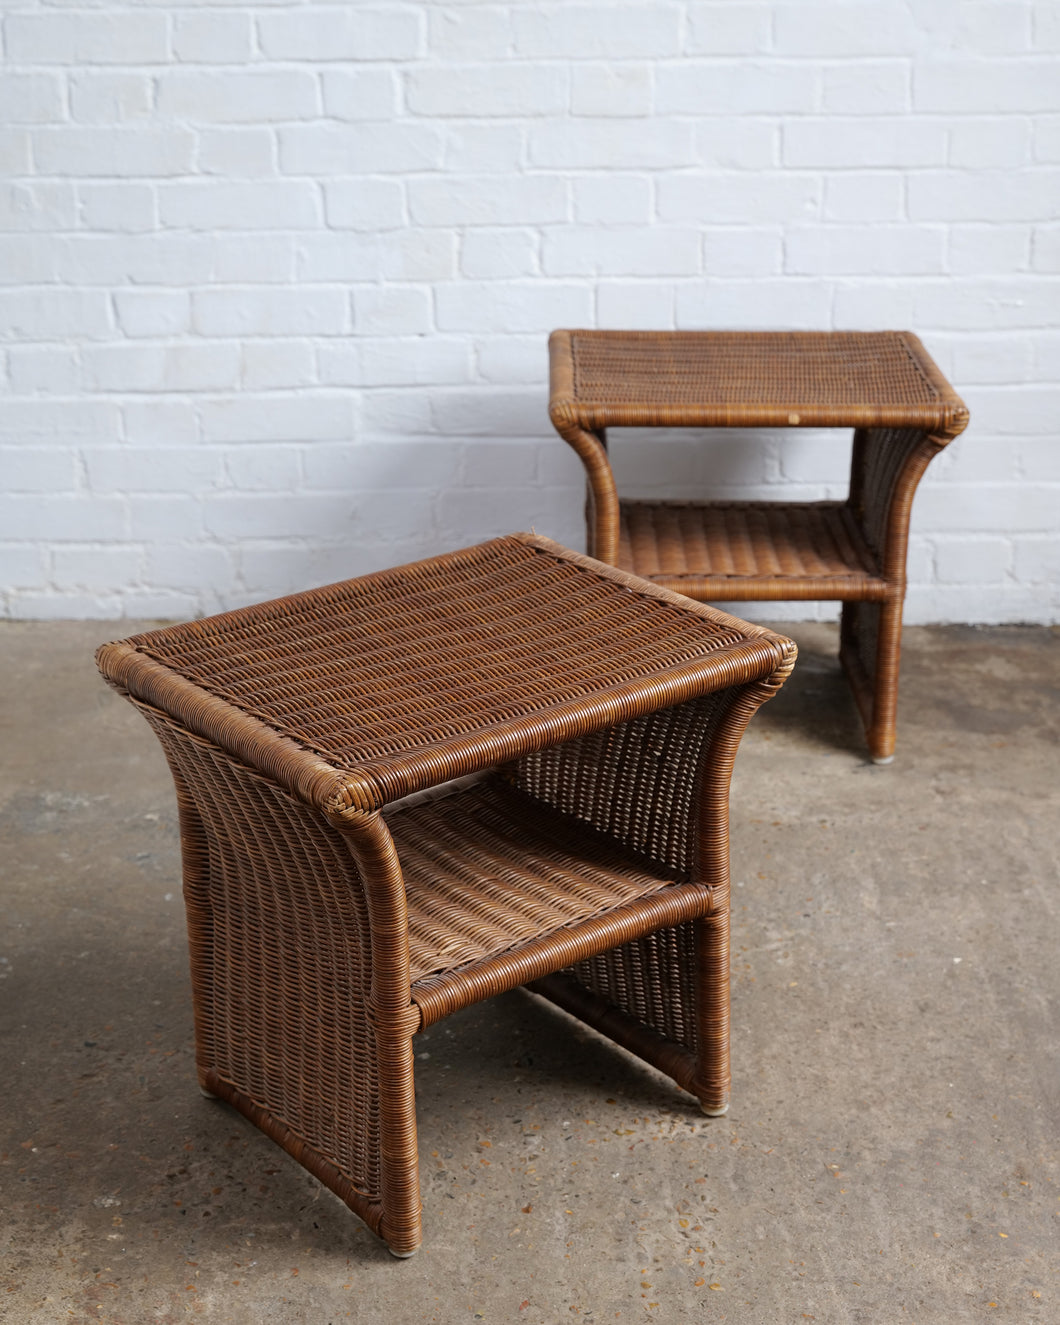 A Pair of Wicker Side Tables